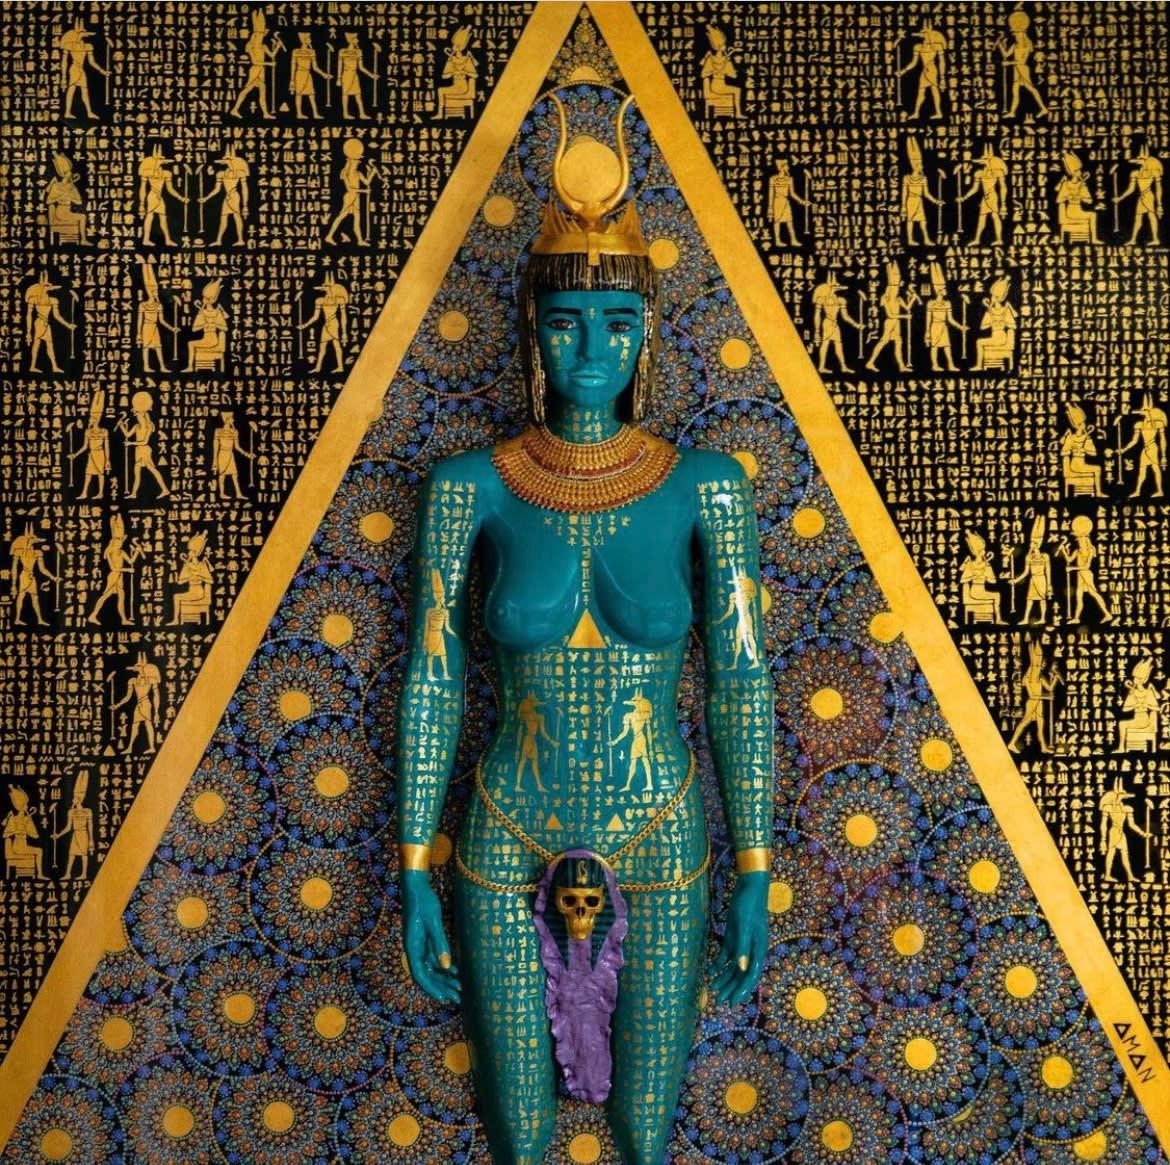 "Queen of the Nile" - Sculptural Mixed Media Painting by Aman Shekarchi